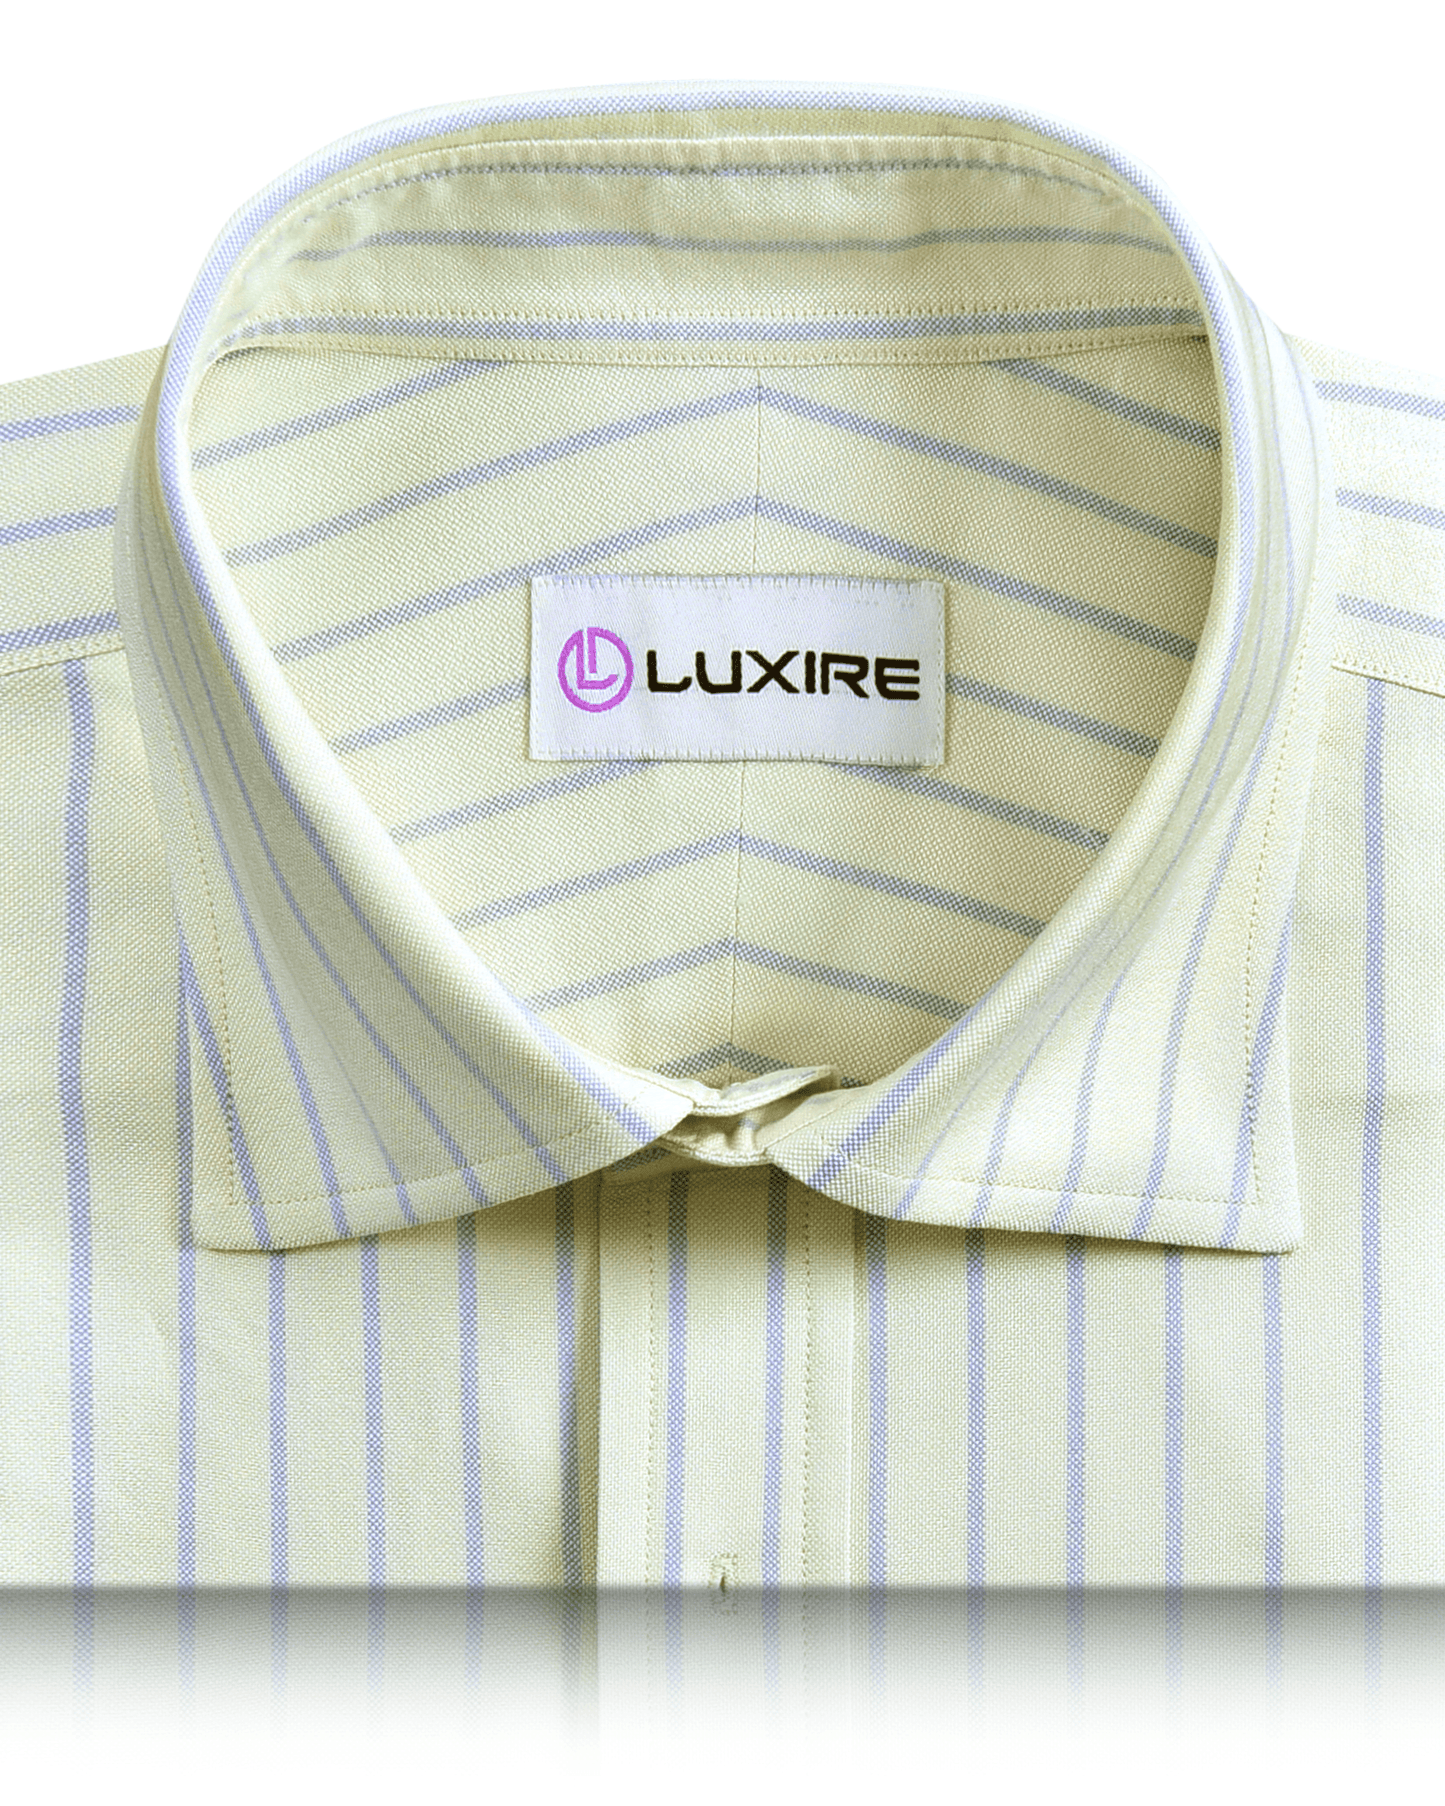 Collar of the custom oxford shirt for men by Luxire in moss green with blue stripes